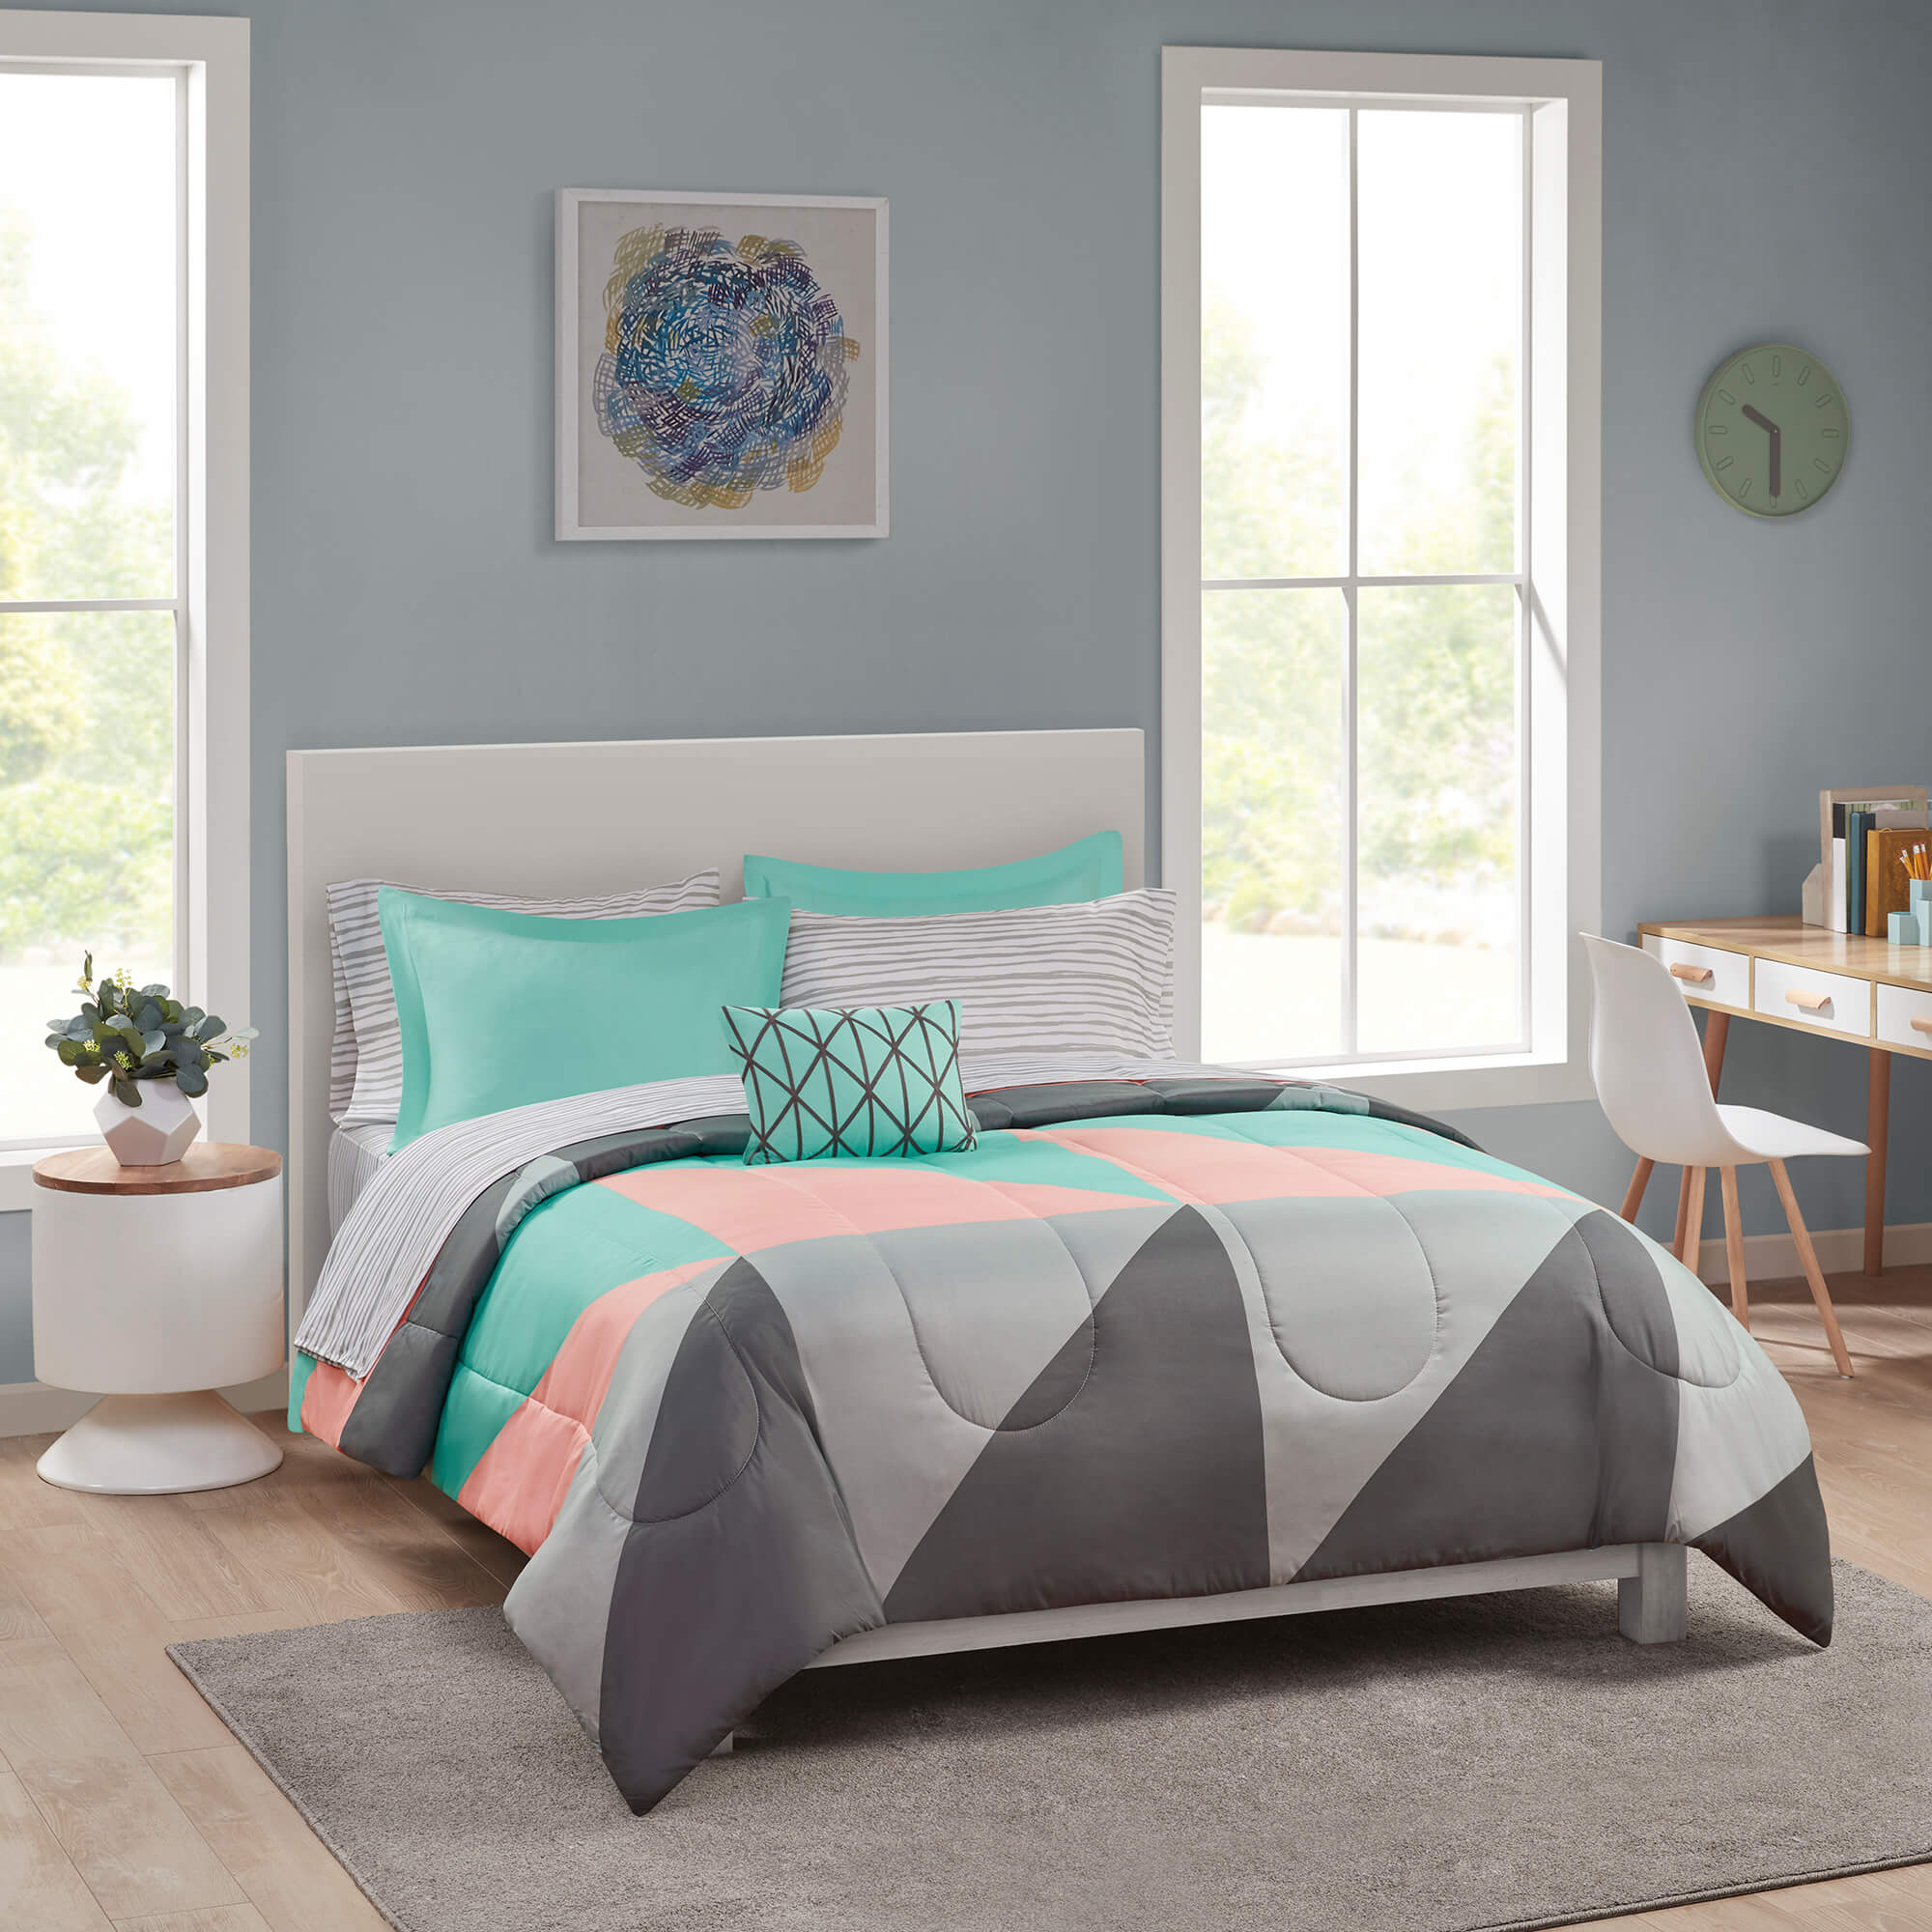 Teal And Grey Bedroom